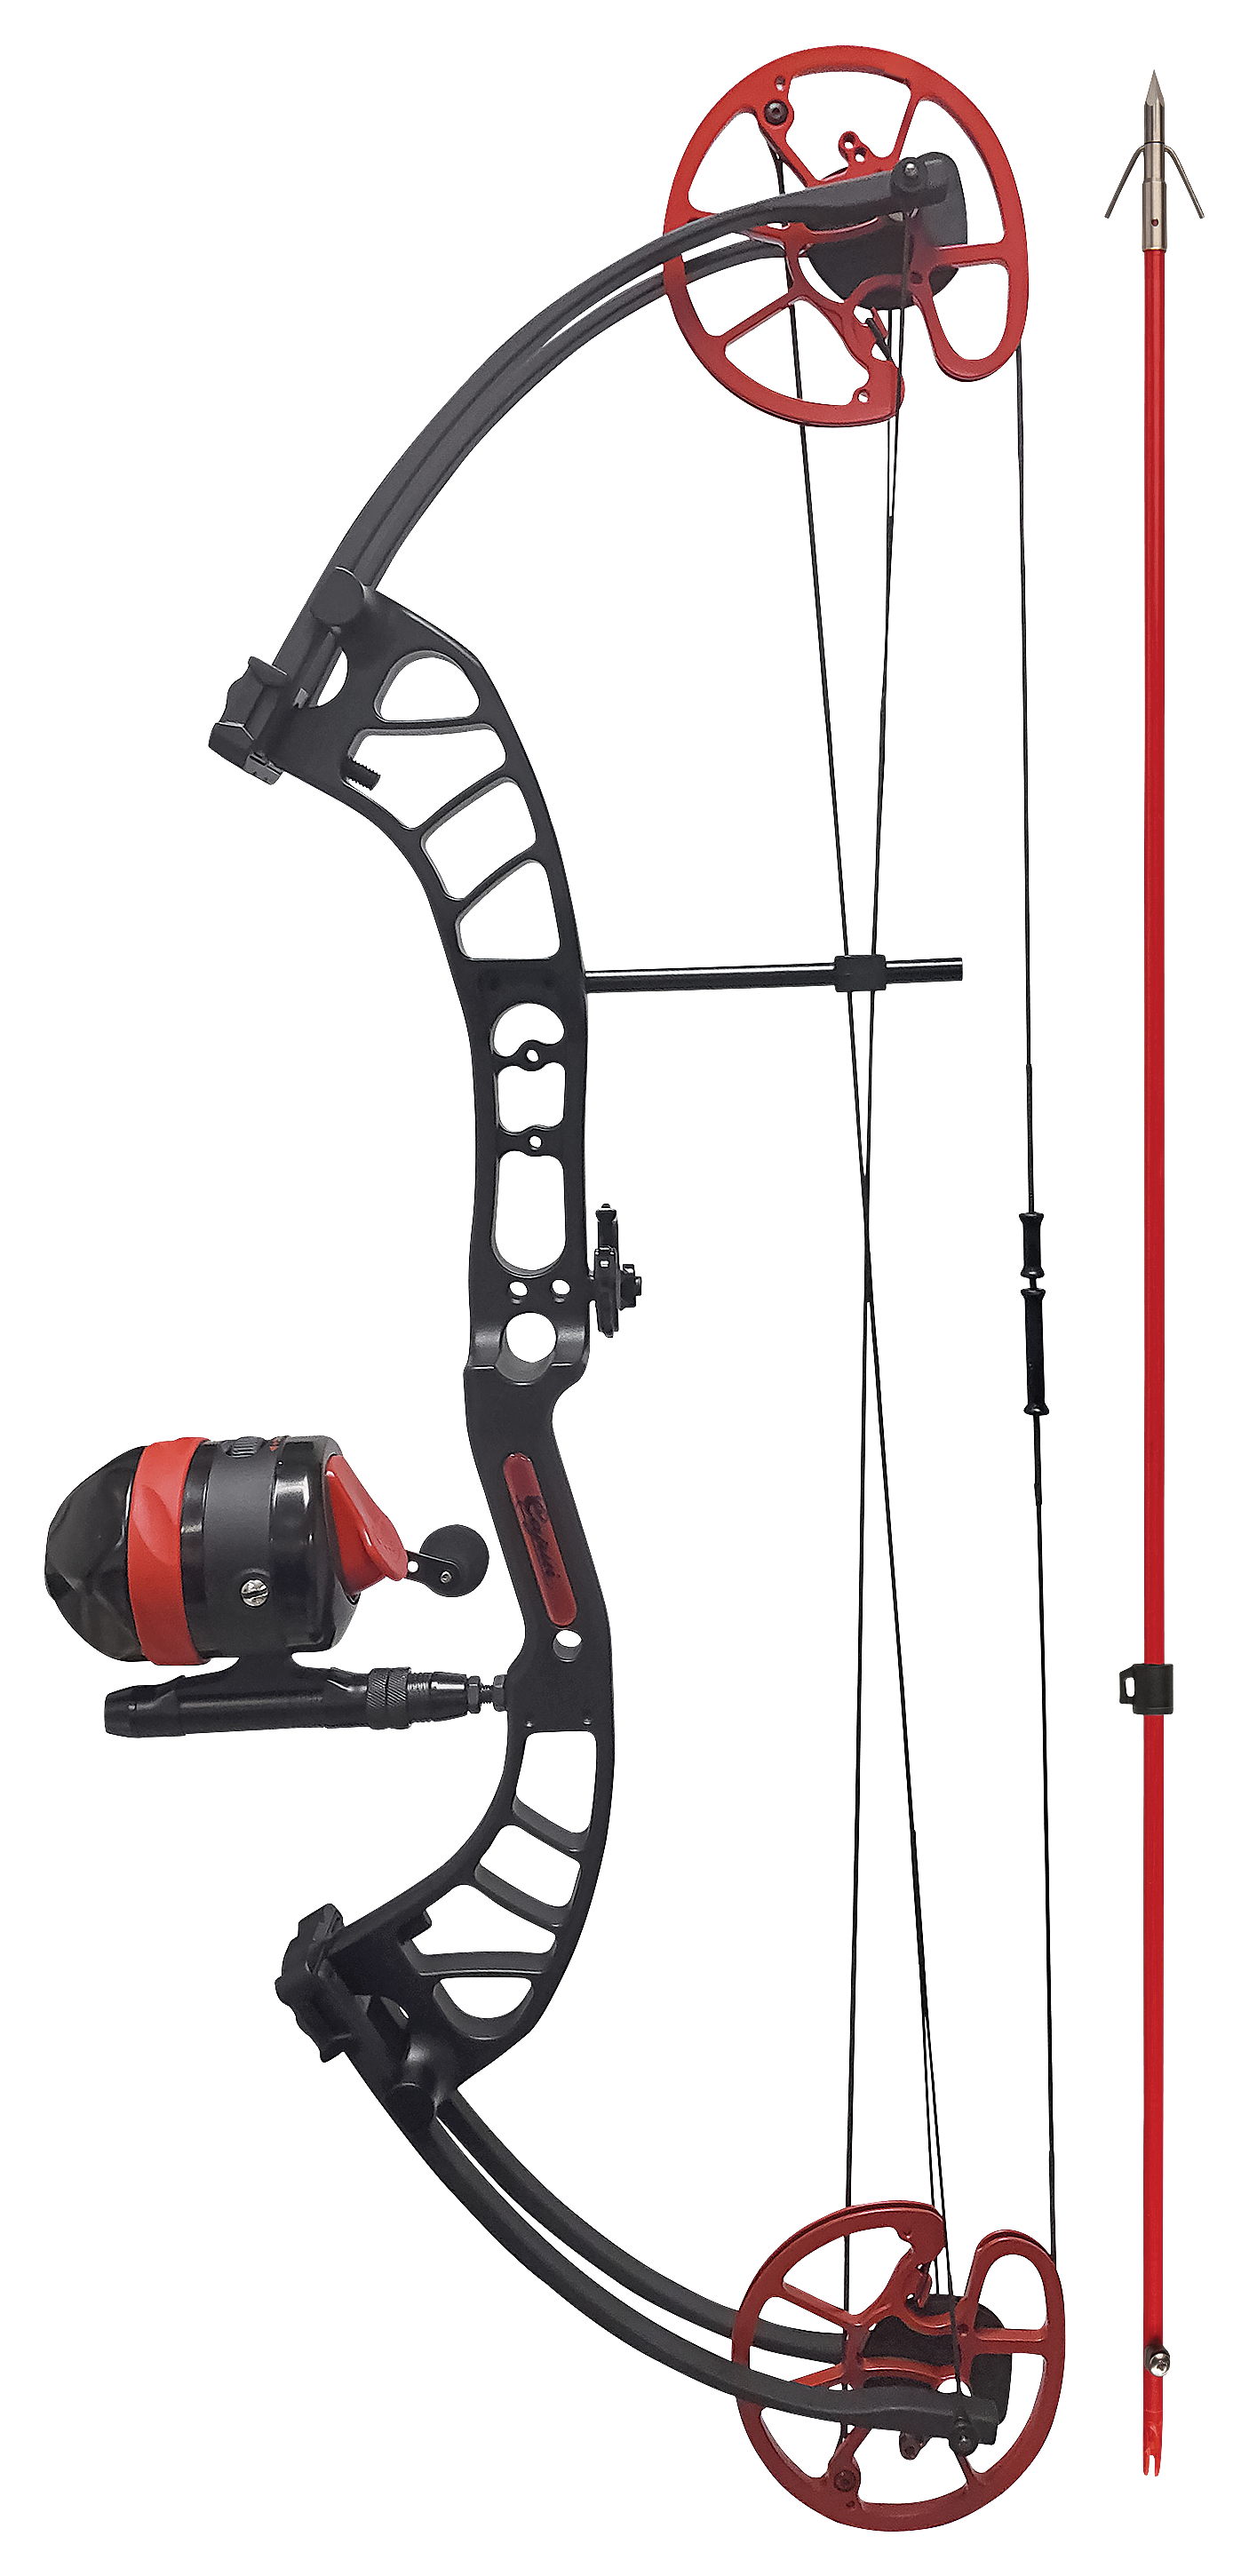 Cajun Bowfishing Shore Runner Ext Compound Bowfishing Bow Ready to Fish Kit  with Brush Fire Arrow Rest, Bowfishing Bottle Reel, Blister Buster Finger  Pads, Fiberglass Arrow, Red, One Size, Compound Bows 